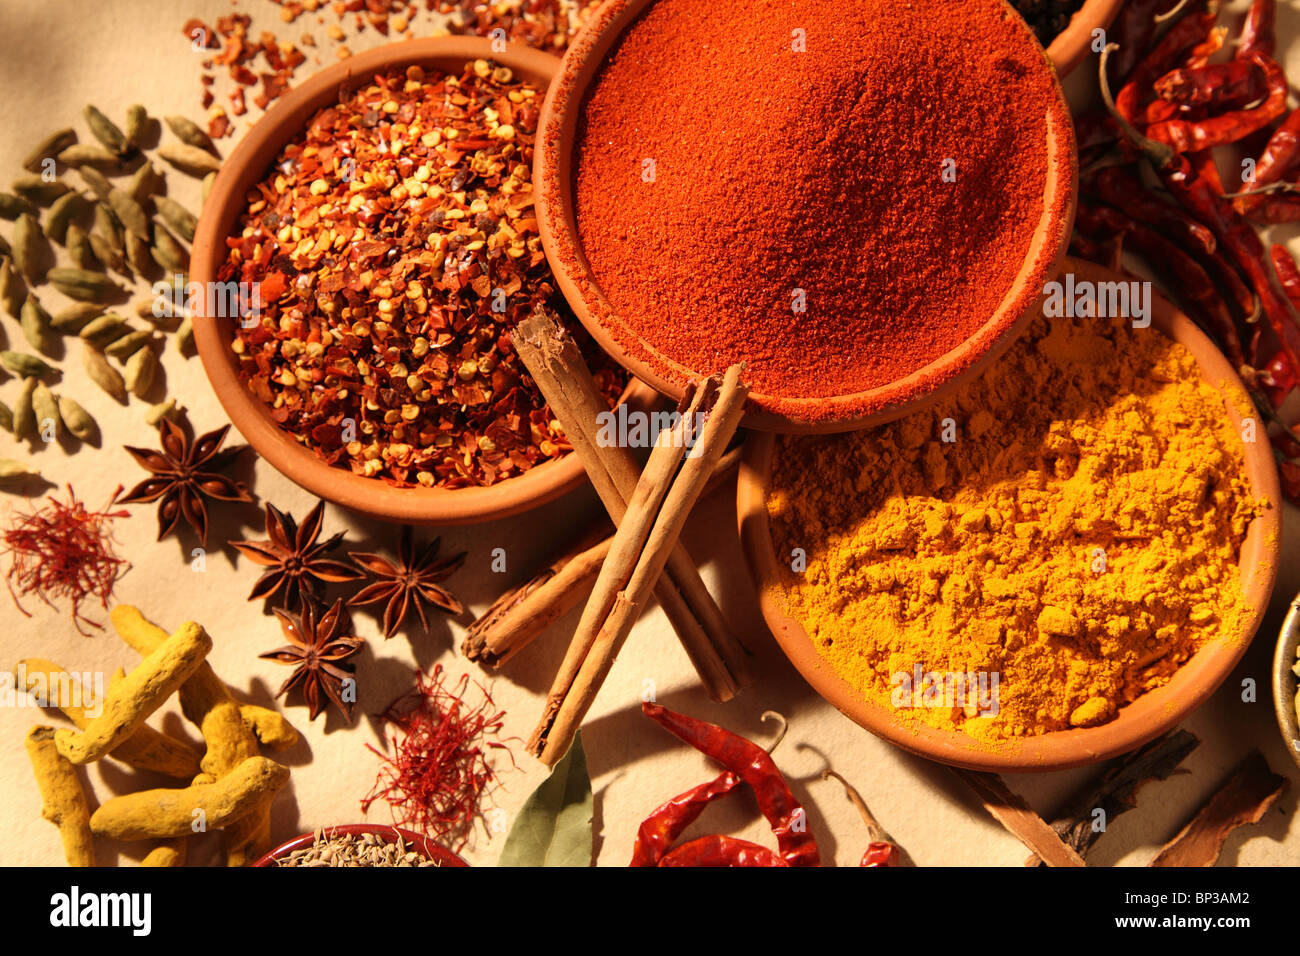 DRIED SPICES Stock Photo